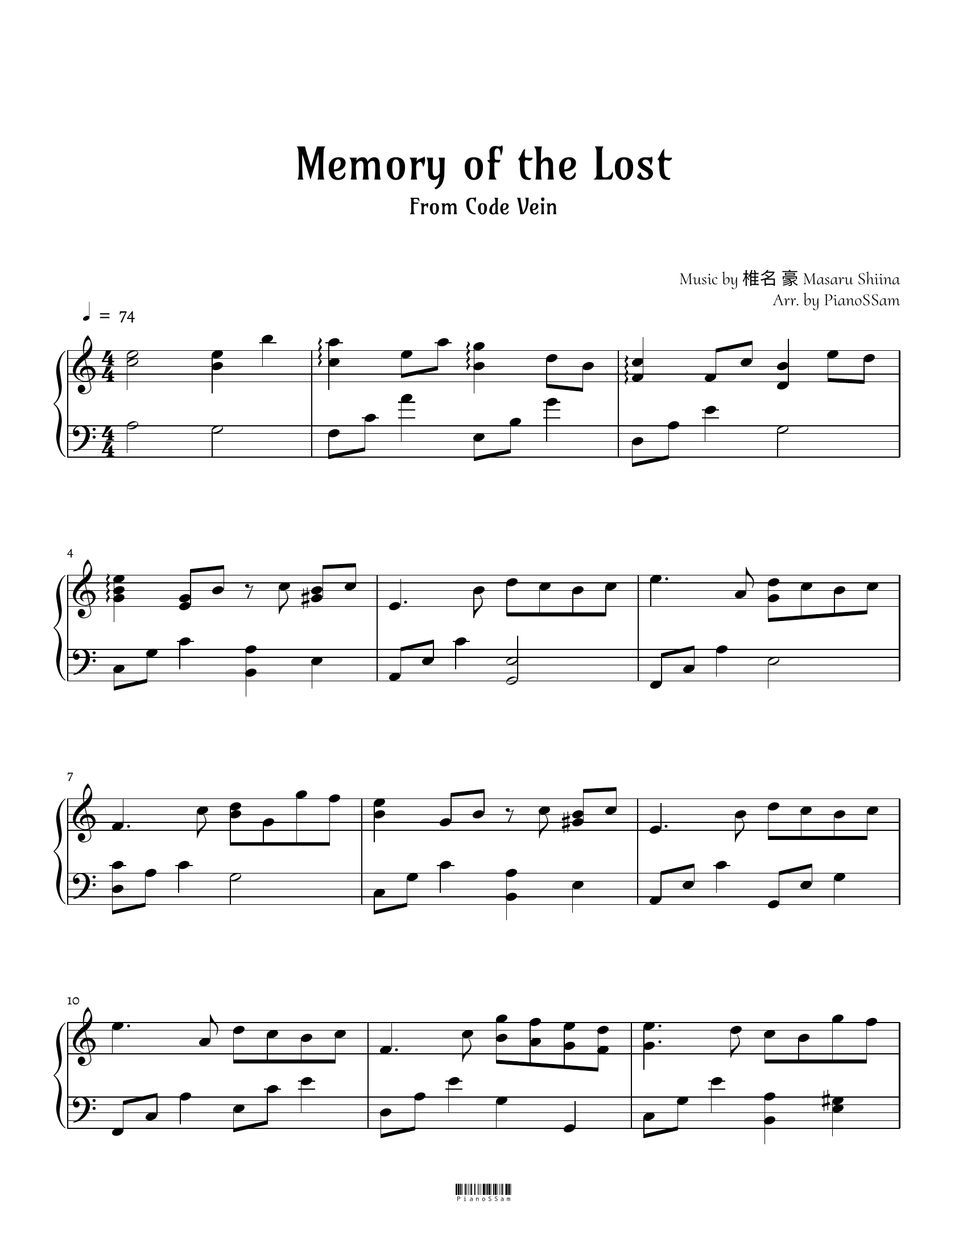 Go Shiina - Memory of the Lost (CodeVein) by PianoSSam